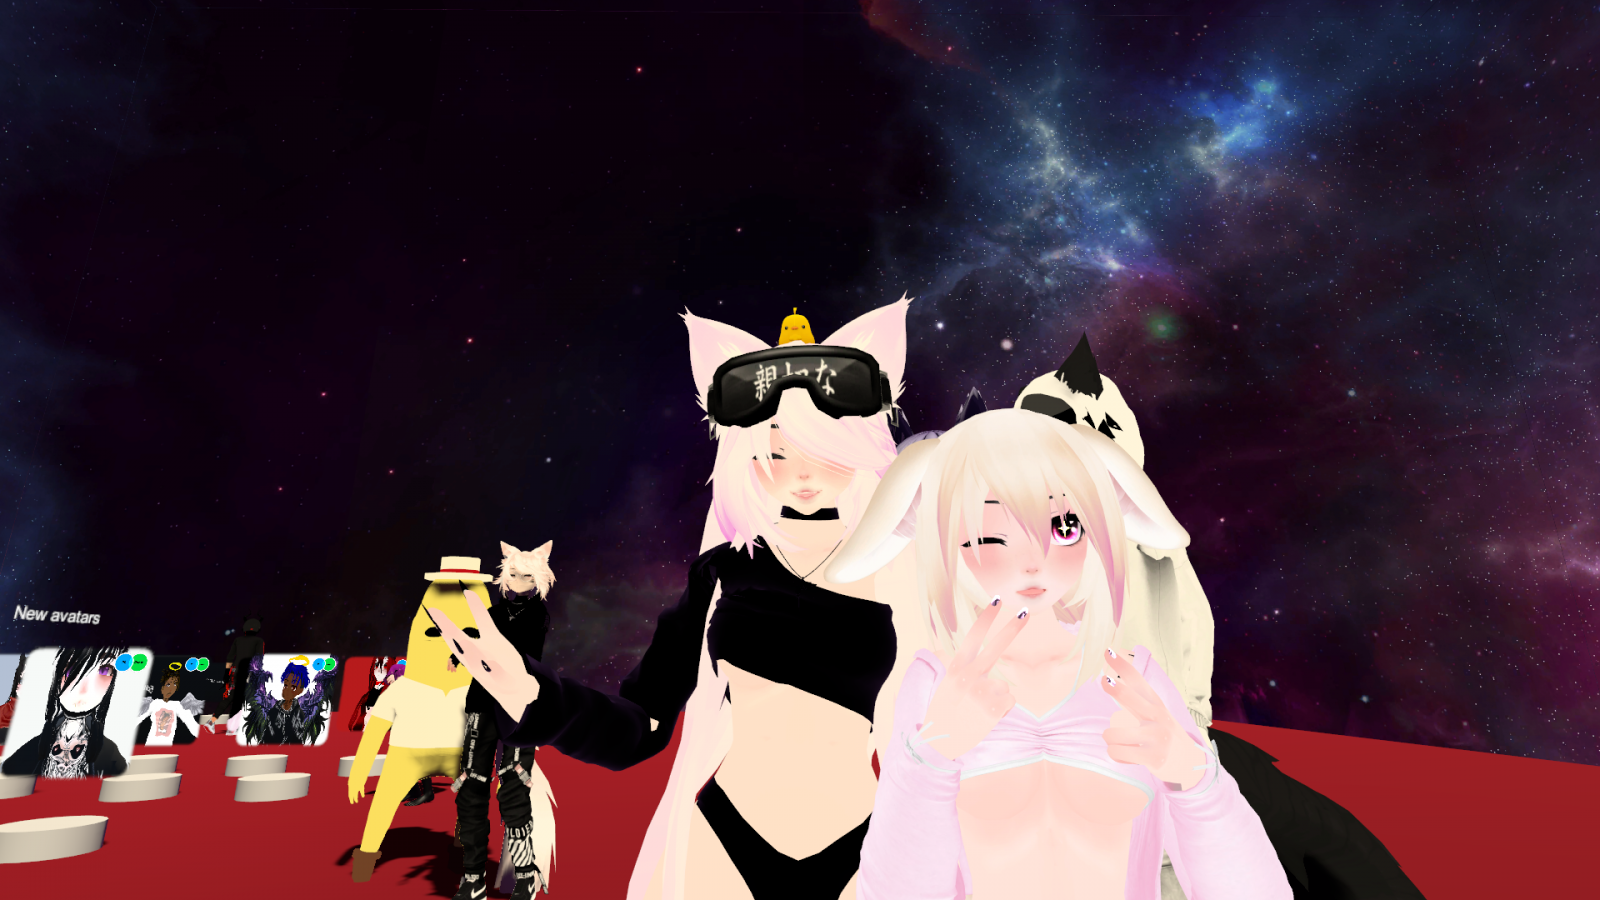 VRChat_1920x1080_2021-02-11_22-53-42.774.png